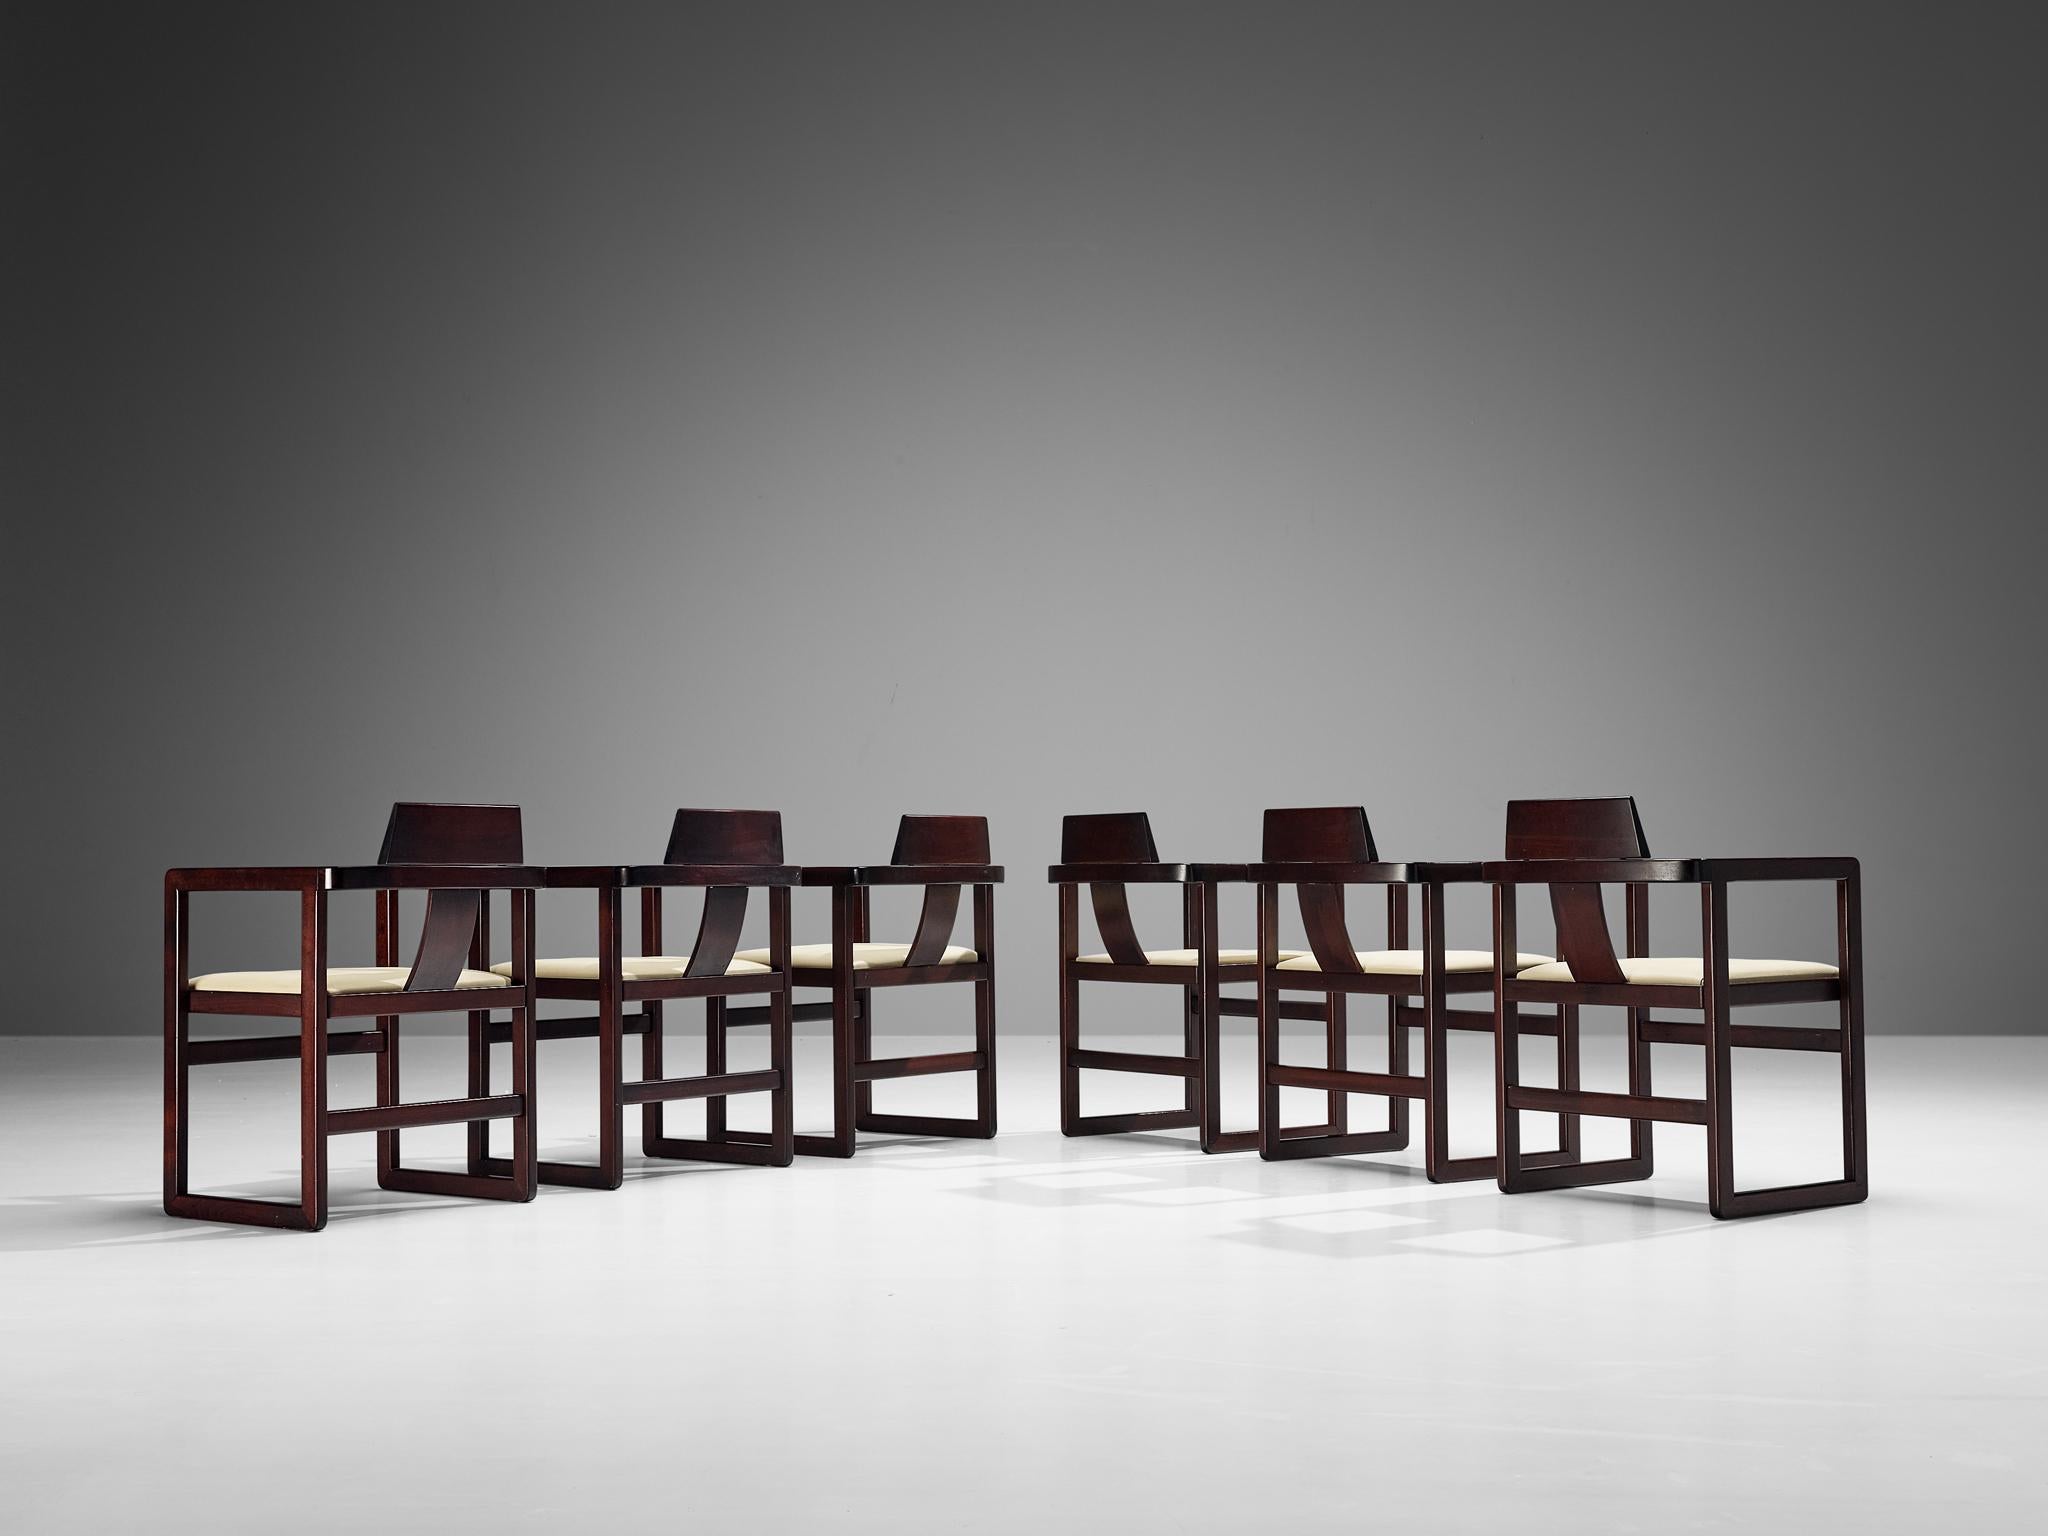 Set of six armchairs, stained beech, leatherette, Italy, 1970s.

Simplistic yet elegant Italian set of six dining chairs. Straight geometric lines are prominent in the execution, for example to be seen in its dark stained wooden frame. An elegant